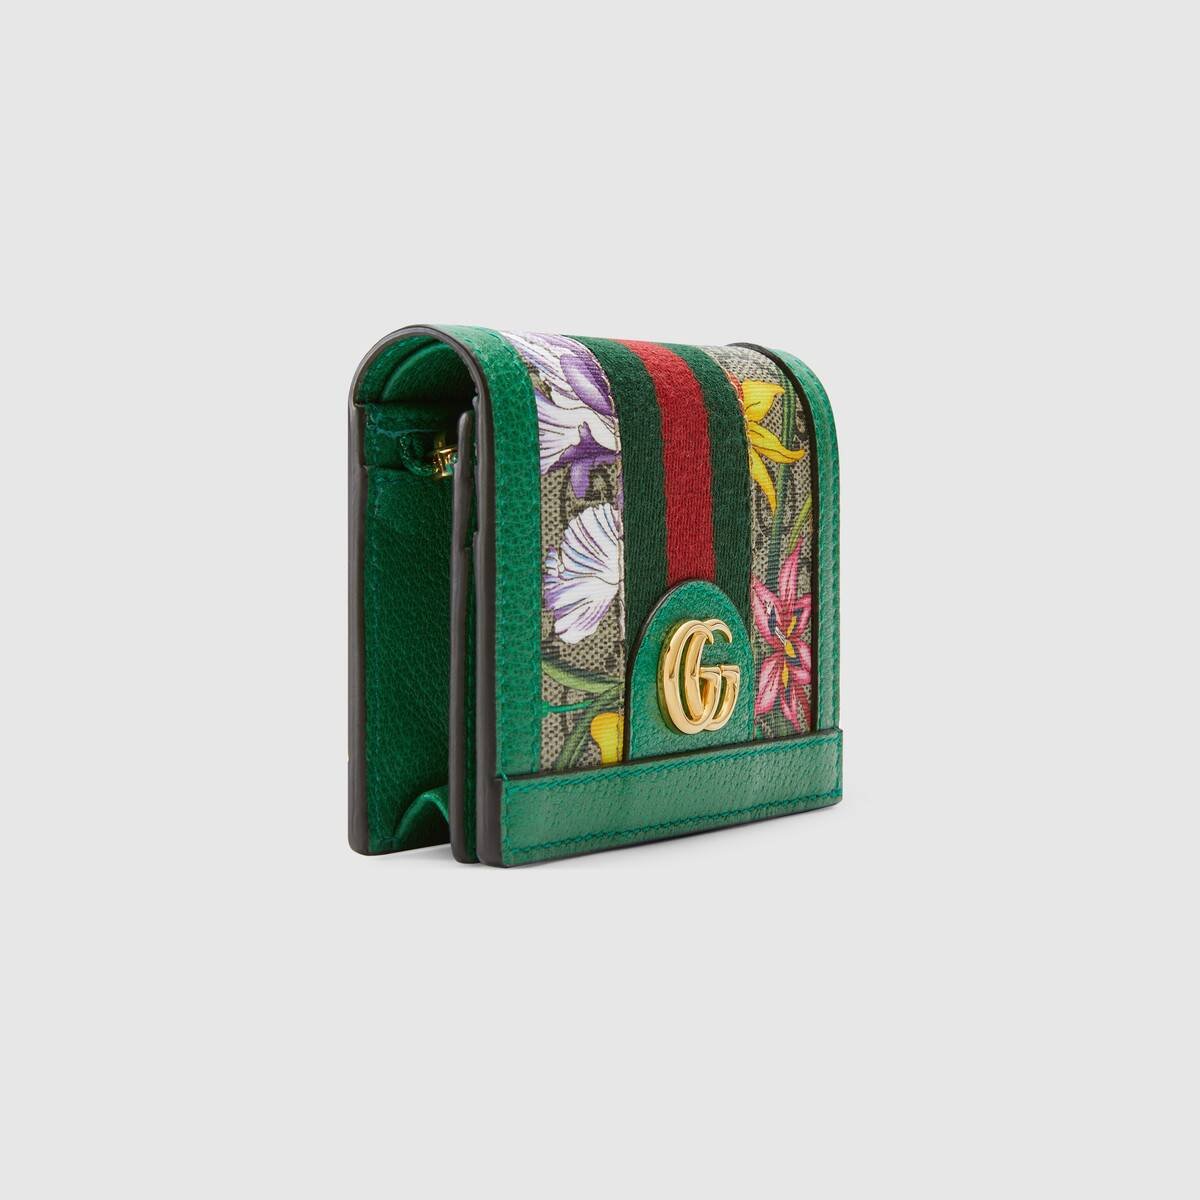 523155-92ybe-8709-004-080-0000-light-online-exclusive-ophidia-gg-flora-card-case-wallet